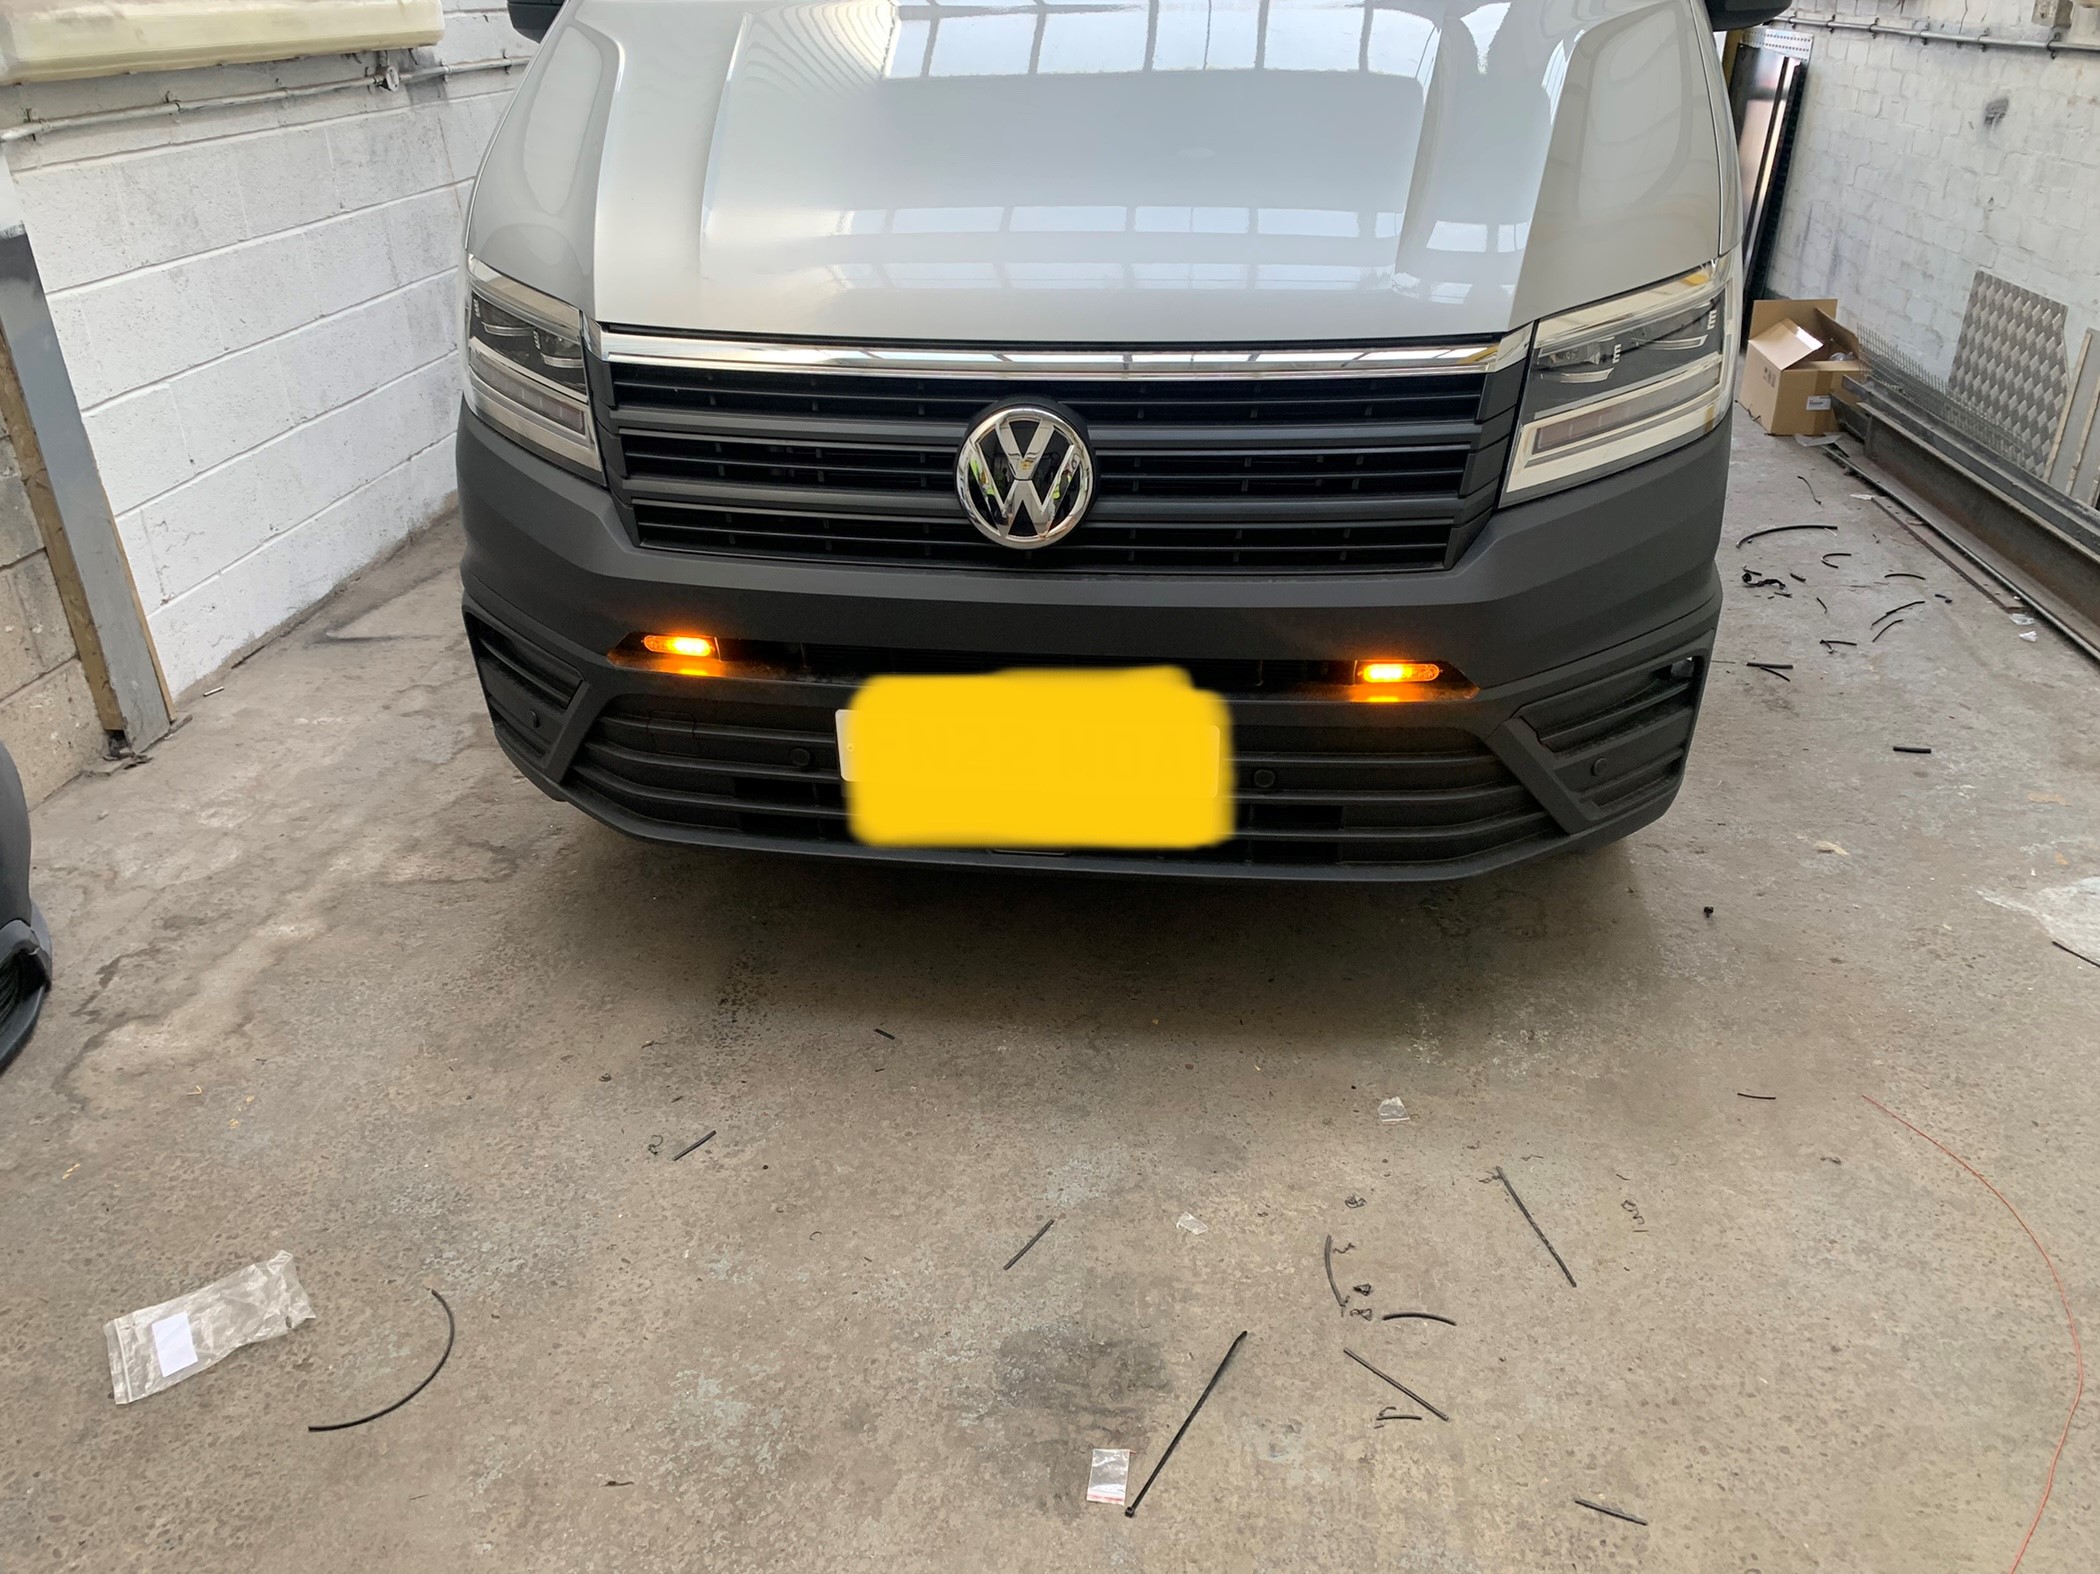 Aftermarket warning lights fitted to a VW Van